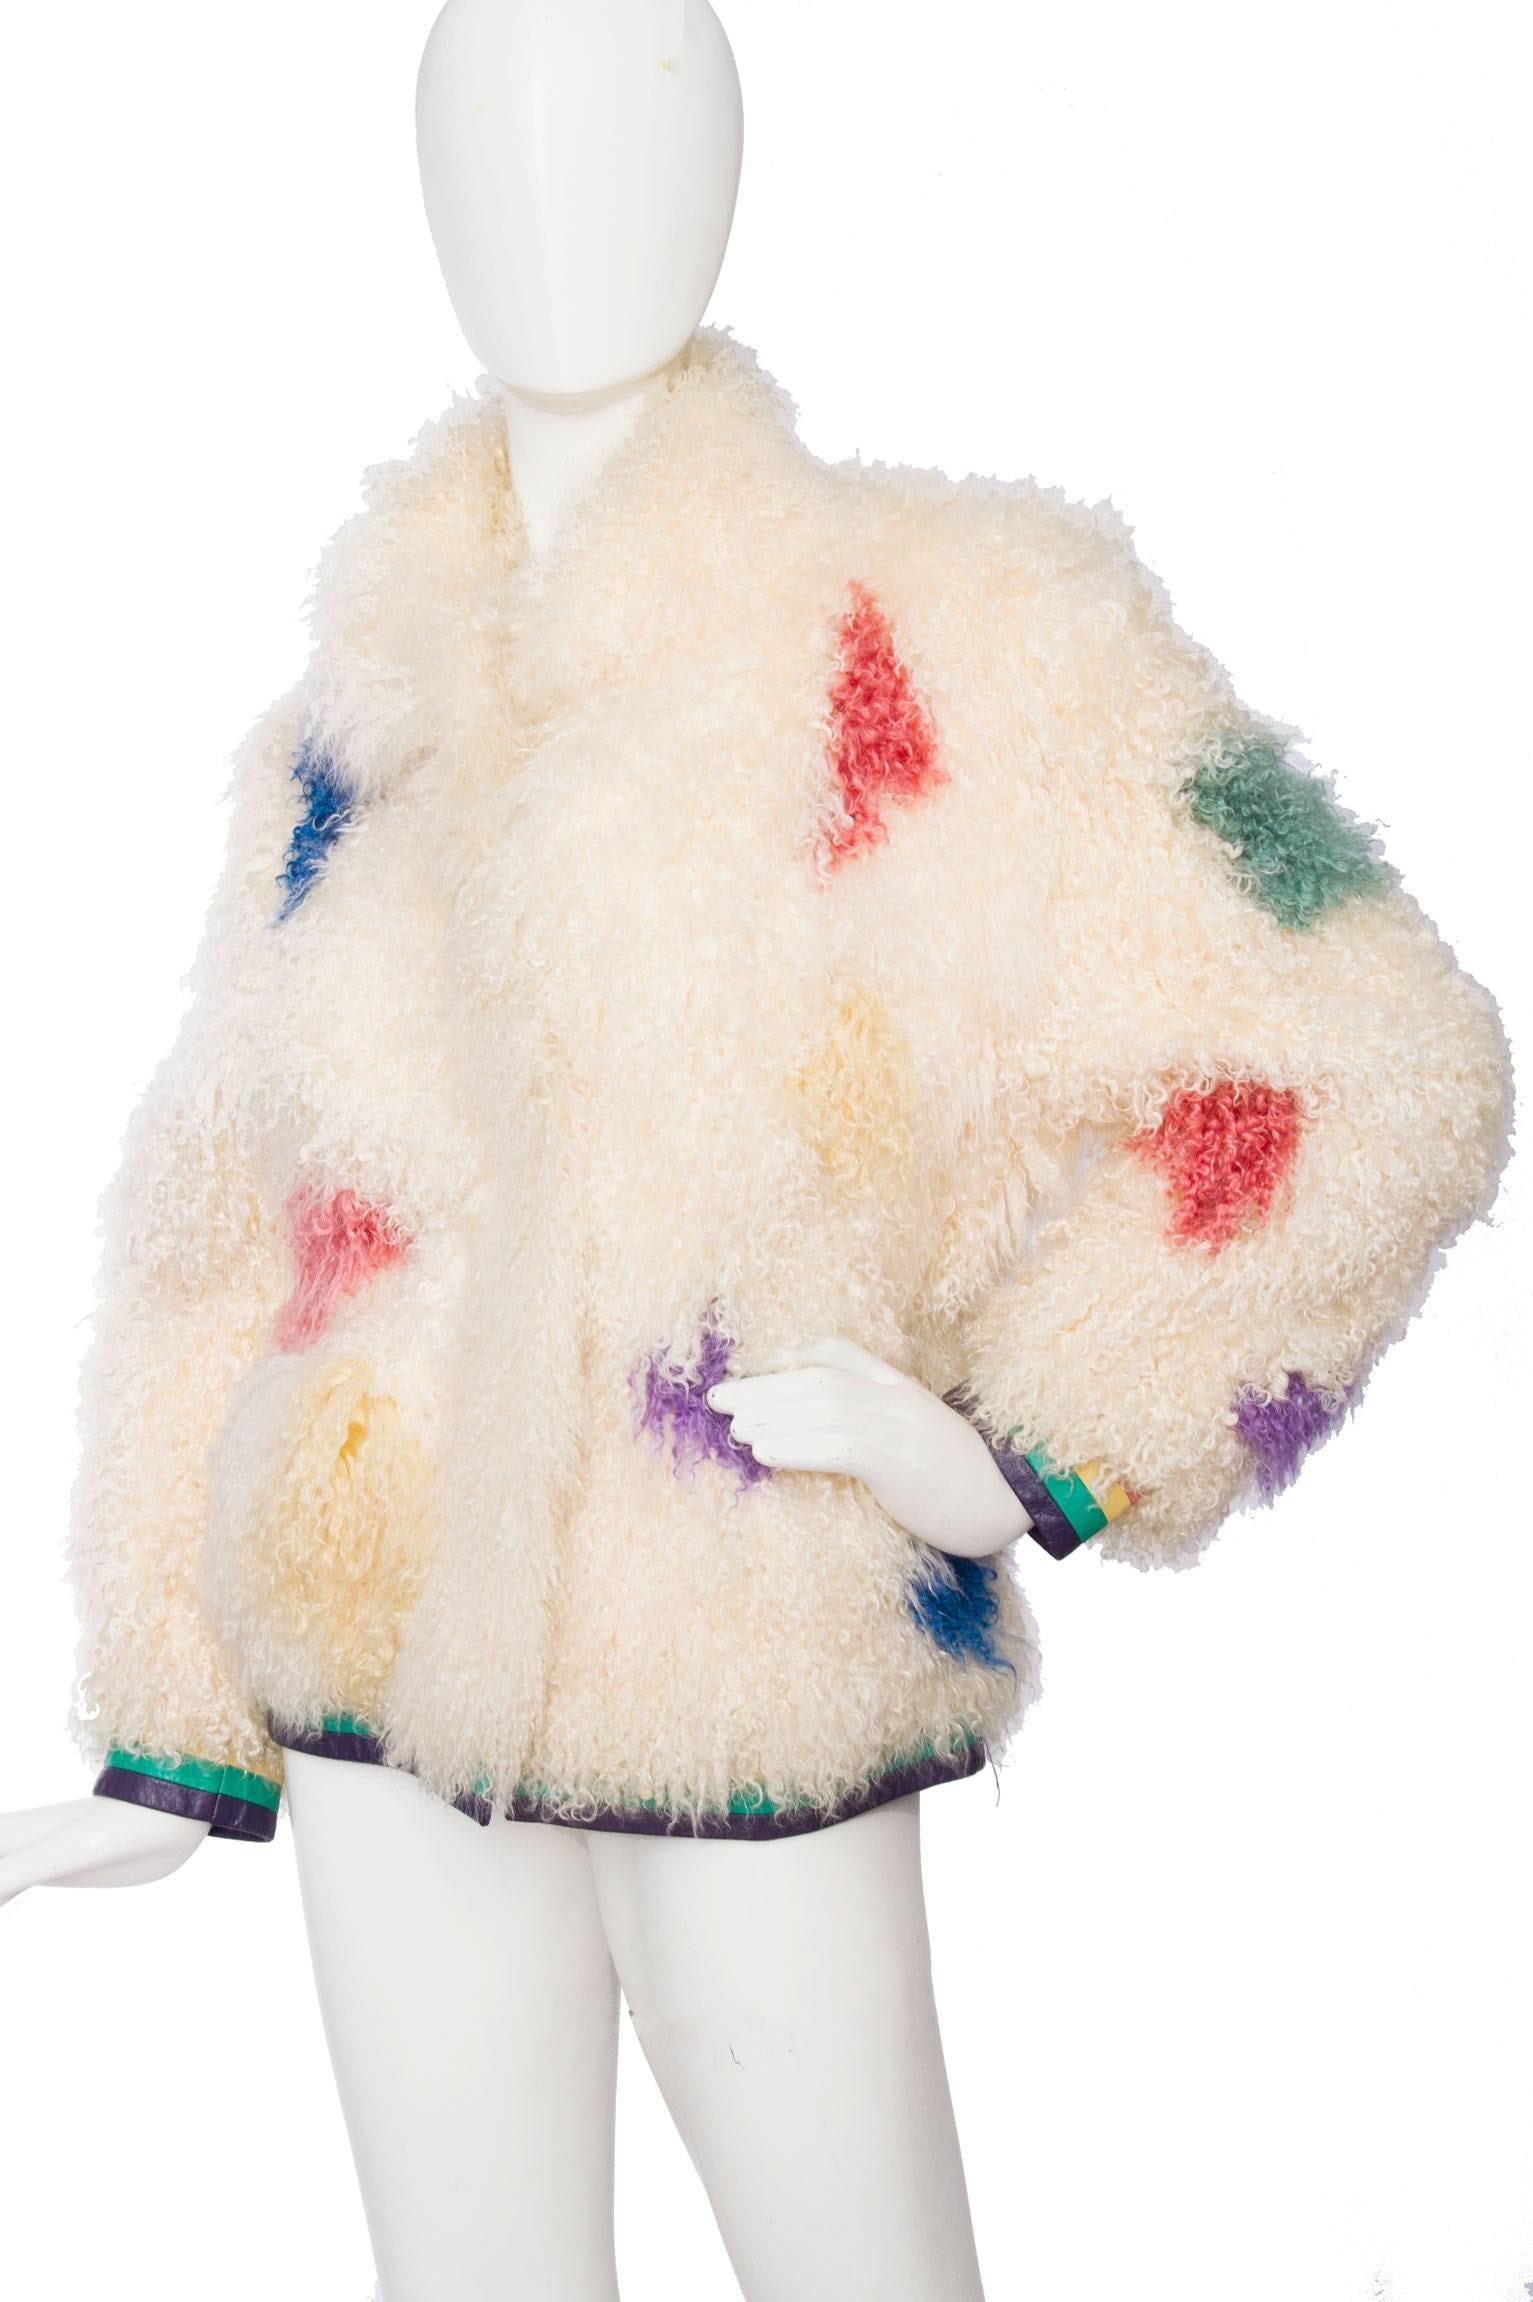 A gorgeous 1980s curly white mongolian lamb fur coat with brightly colored paint splash details in pink, purple yellow and green in various places on the jacket. The coat has a front button closure, is fully lined and has a bright purple, green and